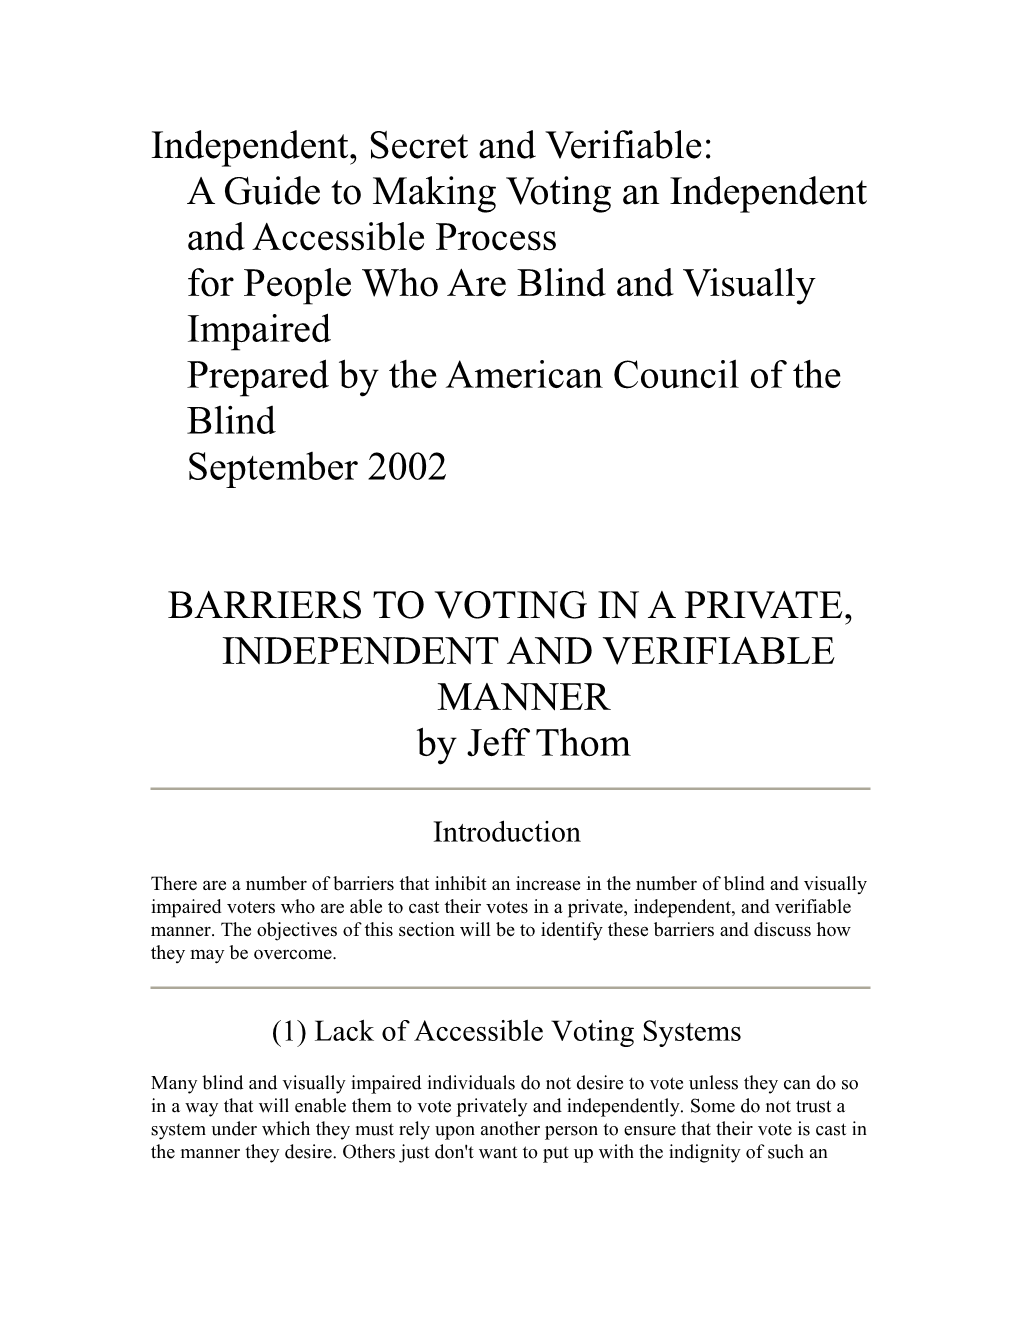 Barriers to Voting in a Private, Independent and Verifiable Manner